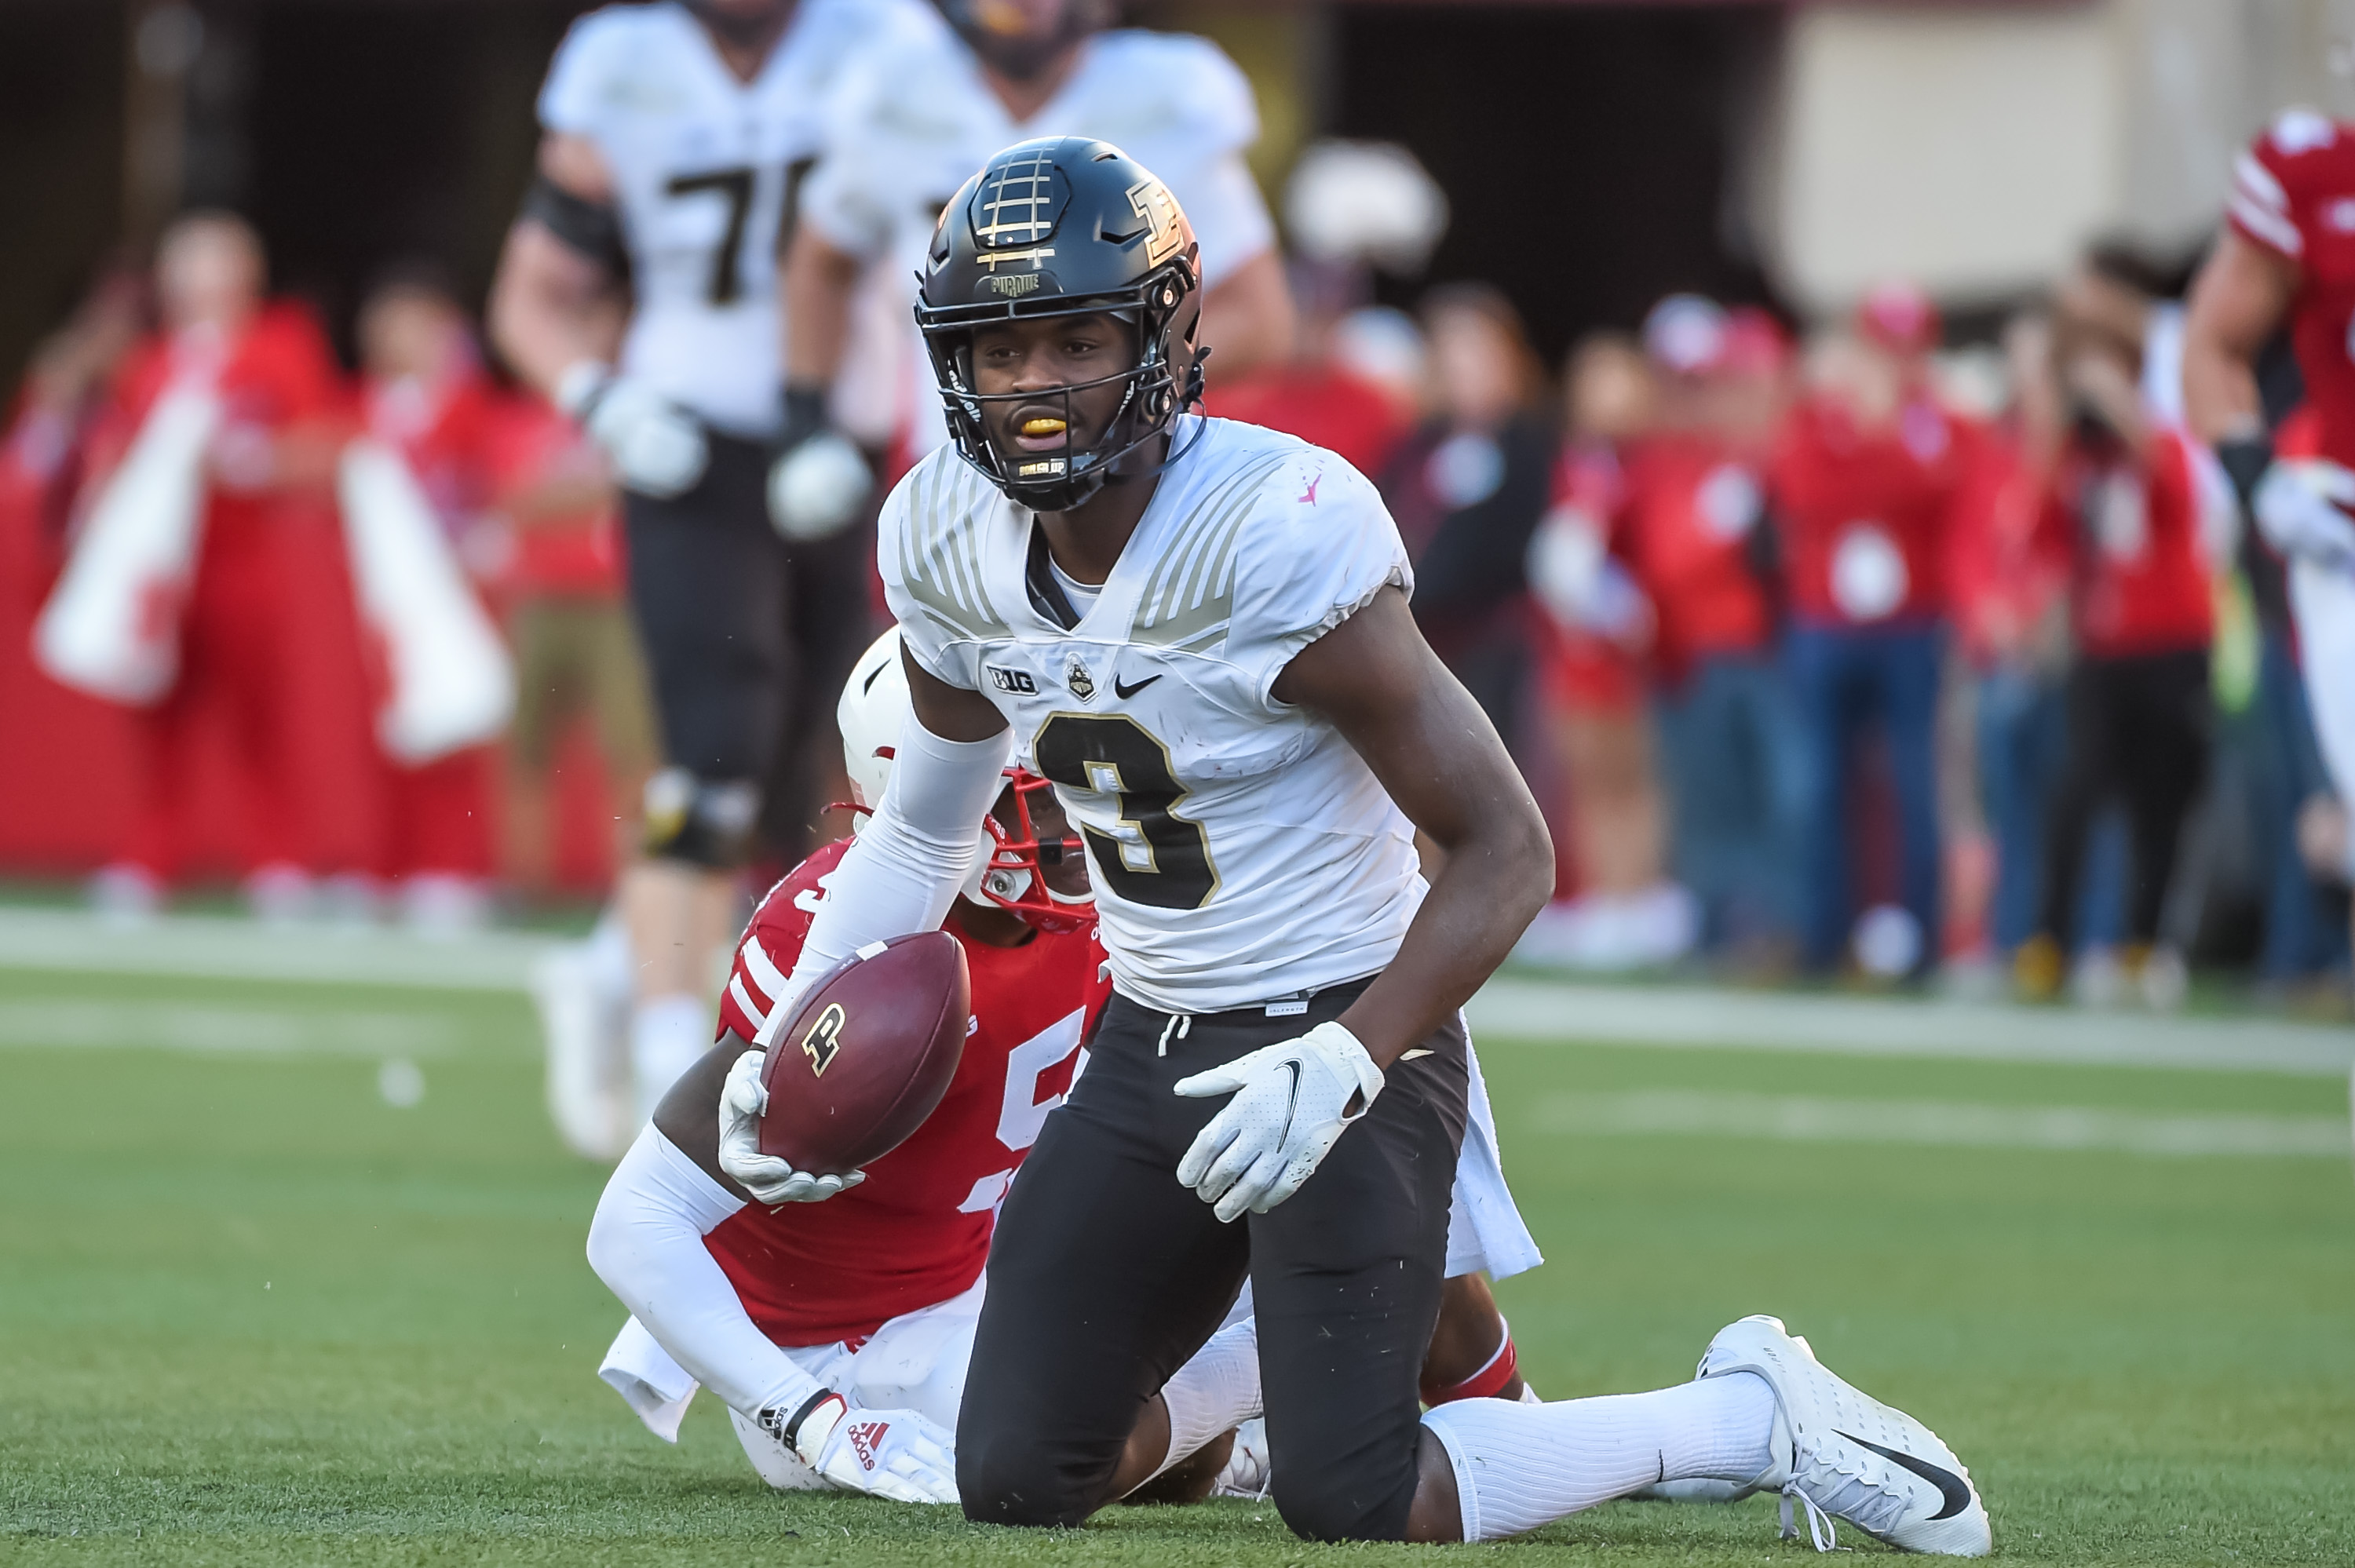 David Bell NFL Draft 2022: Scouting Report for Cleveland Browns’ WR